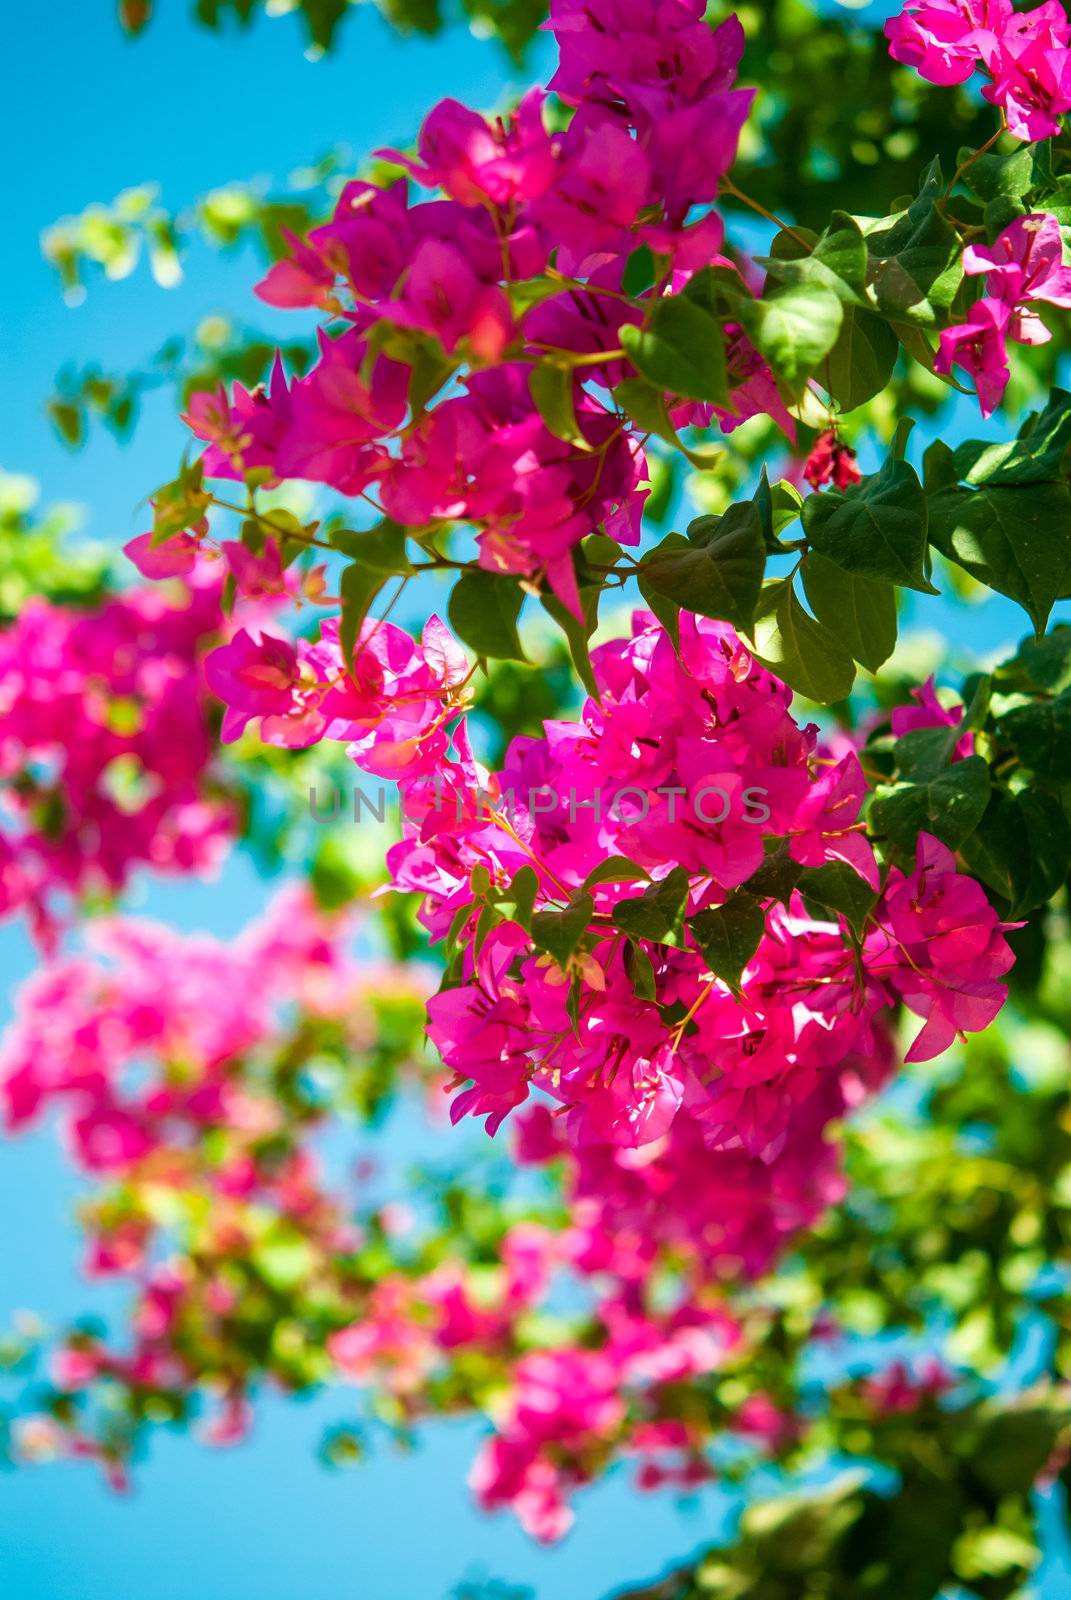 Purple blossom flowers at spring over blue sky and foliage background